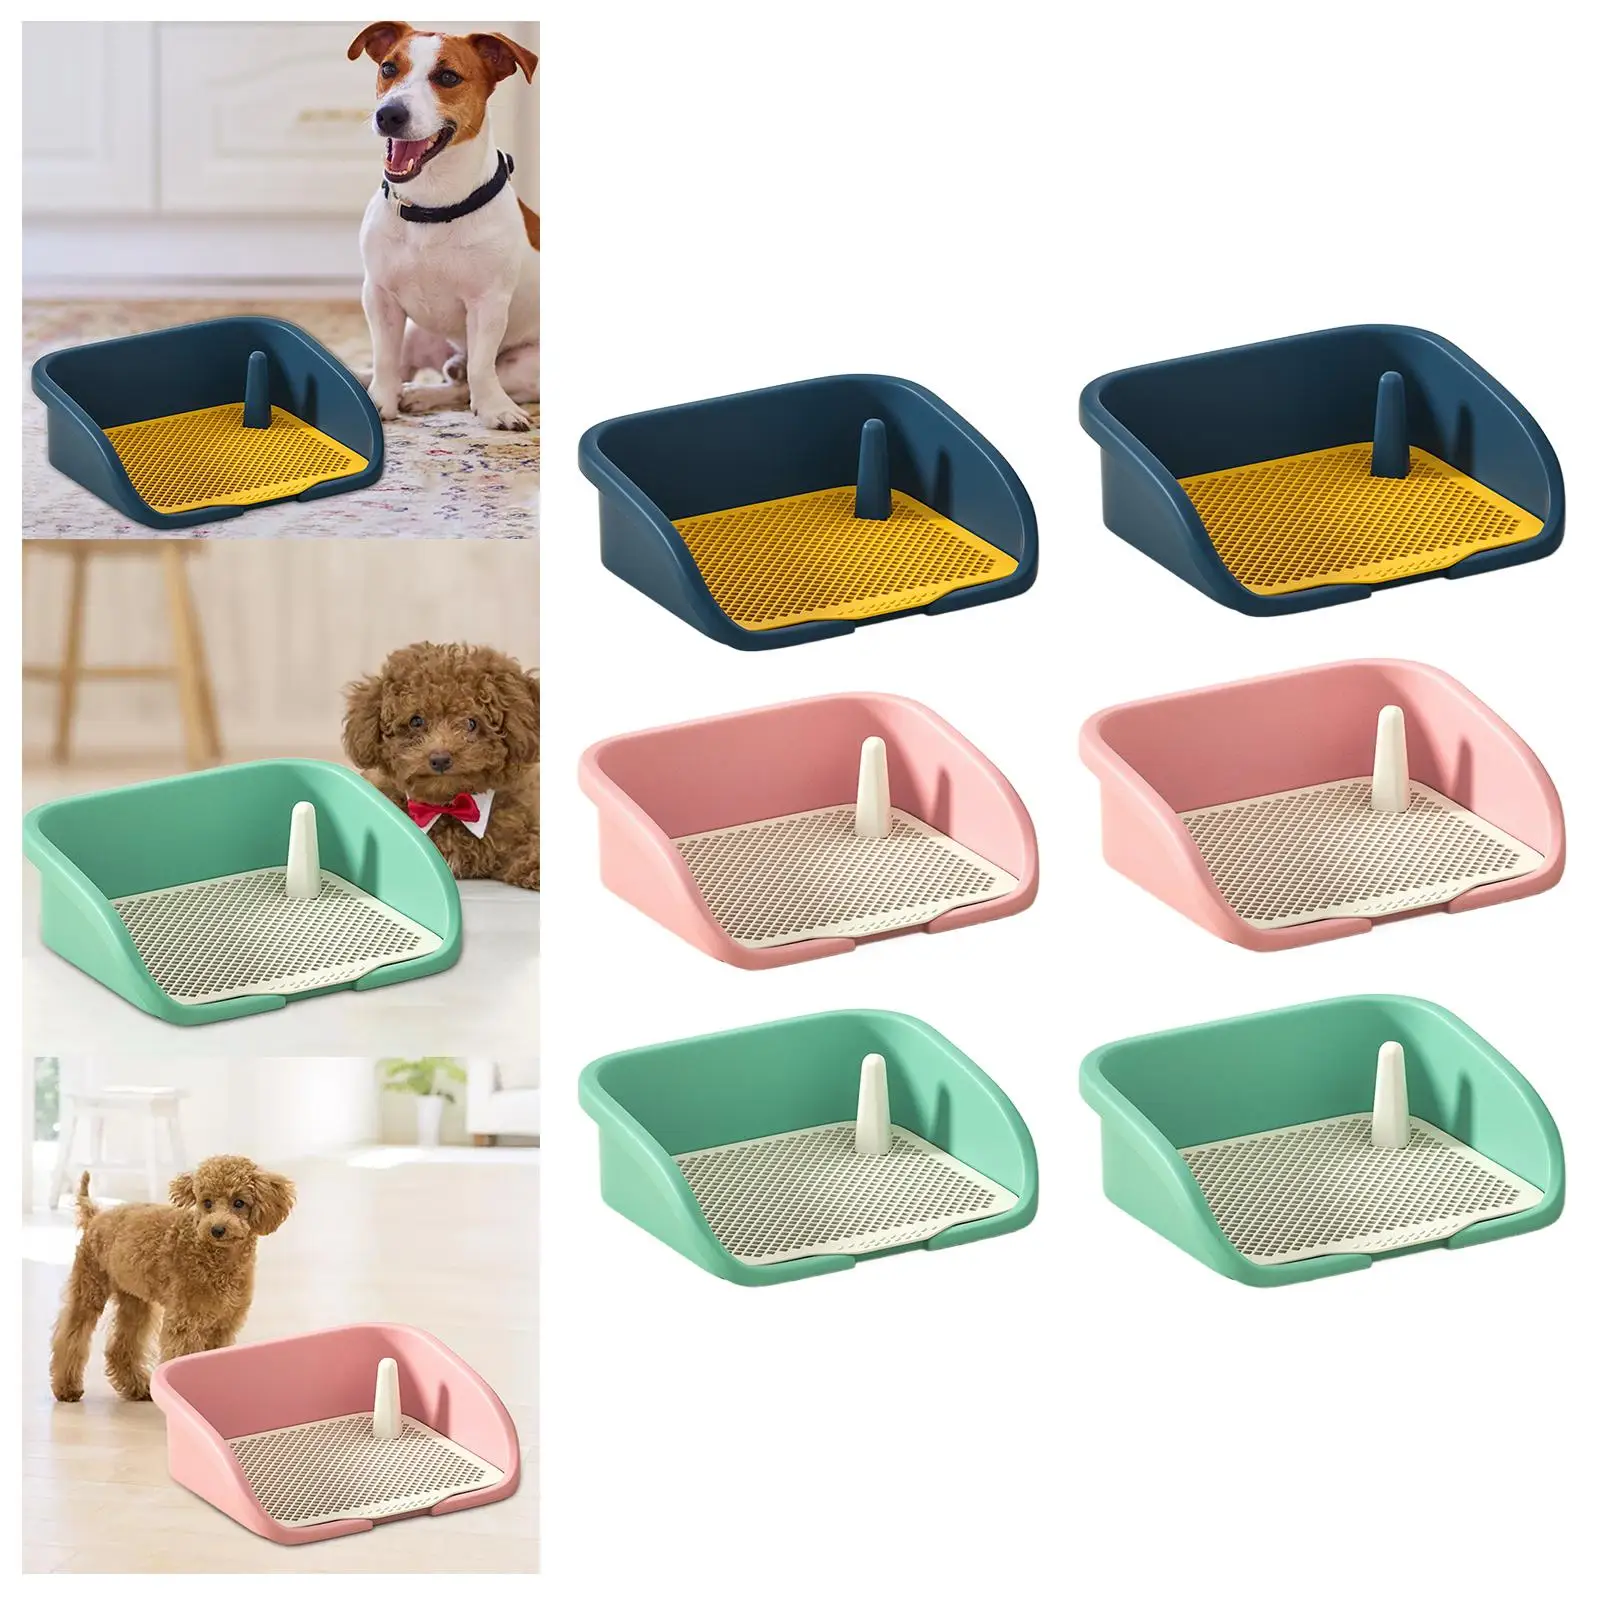 Pet Training Pee Pad Potty Trainer Toilet Tray with Column Puppy Toilet Mesh